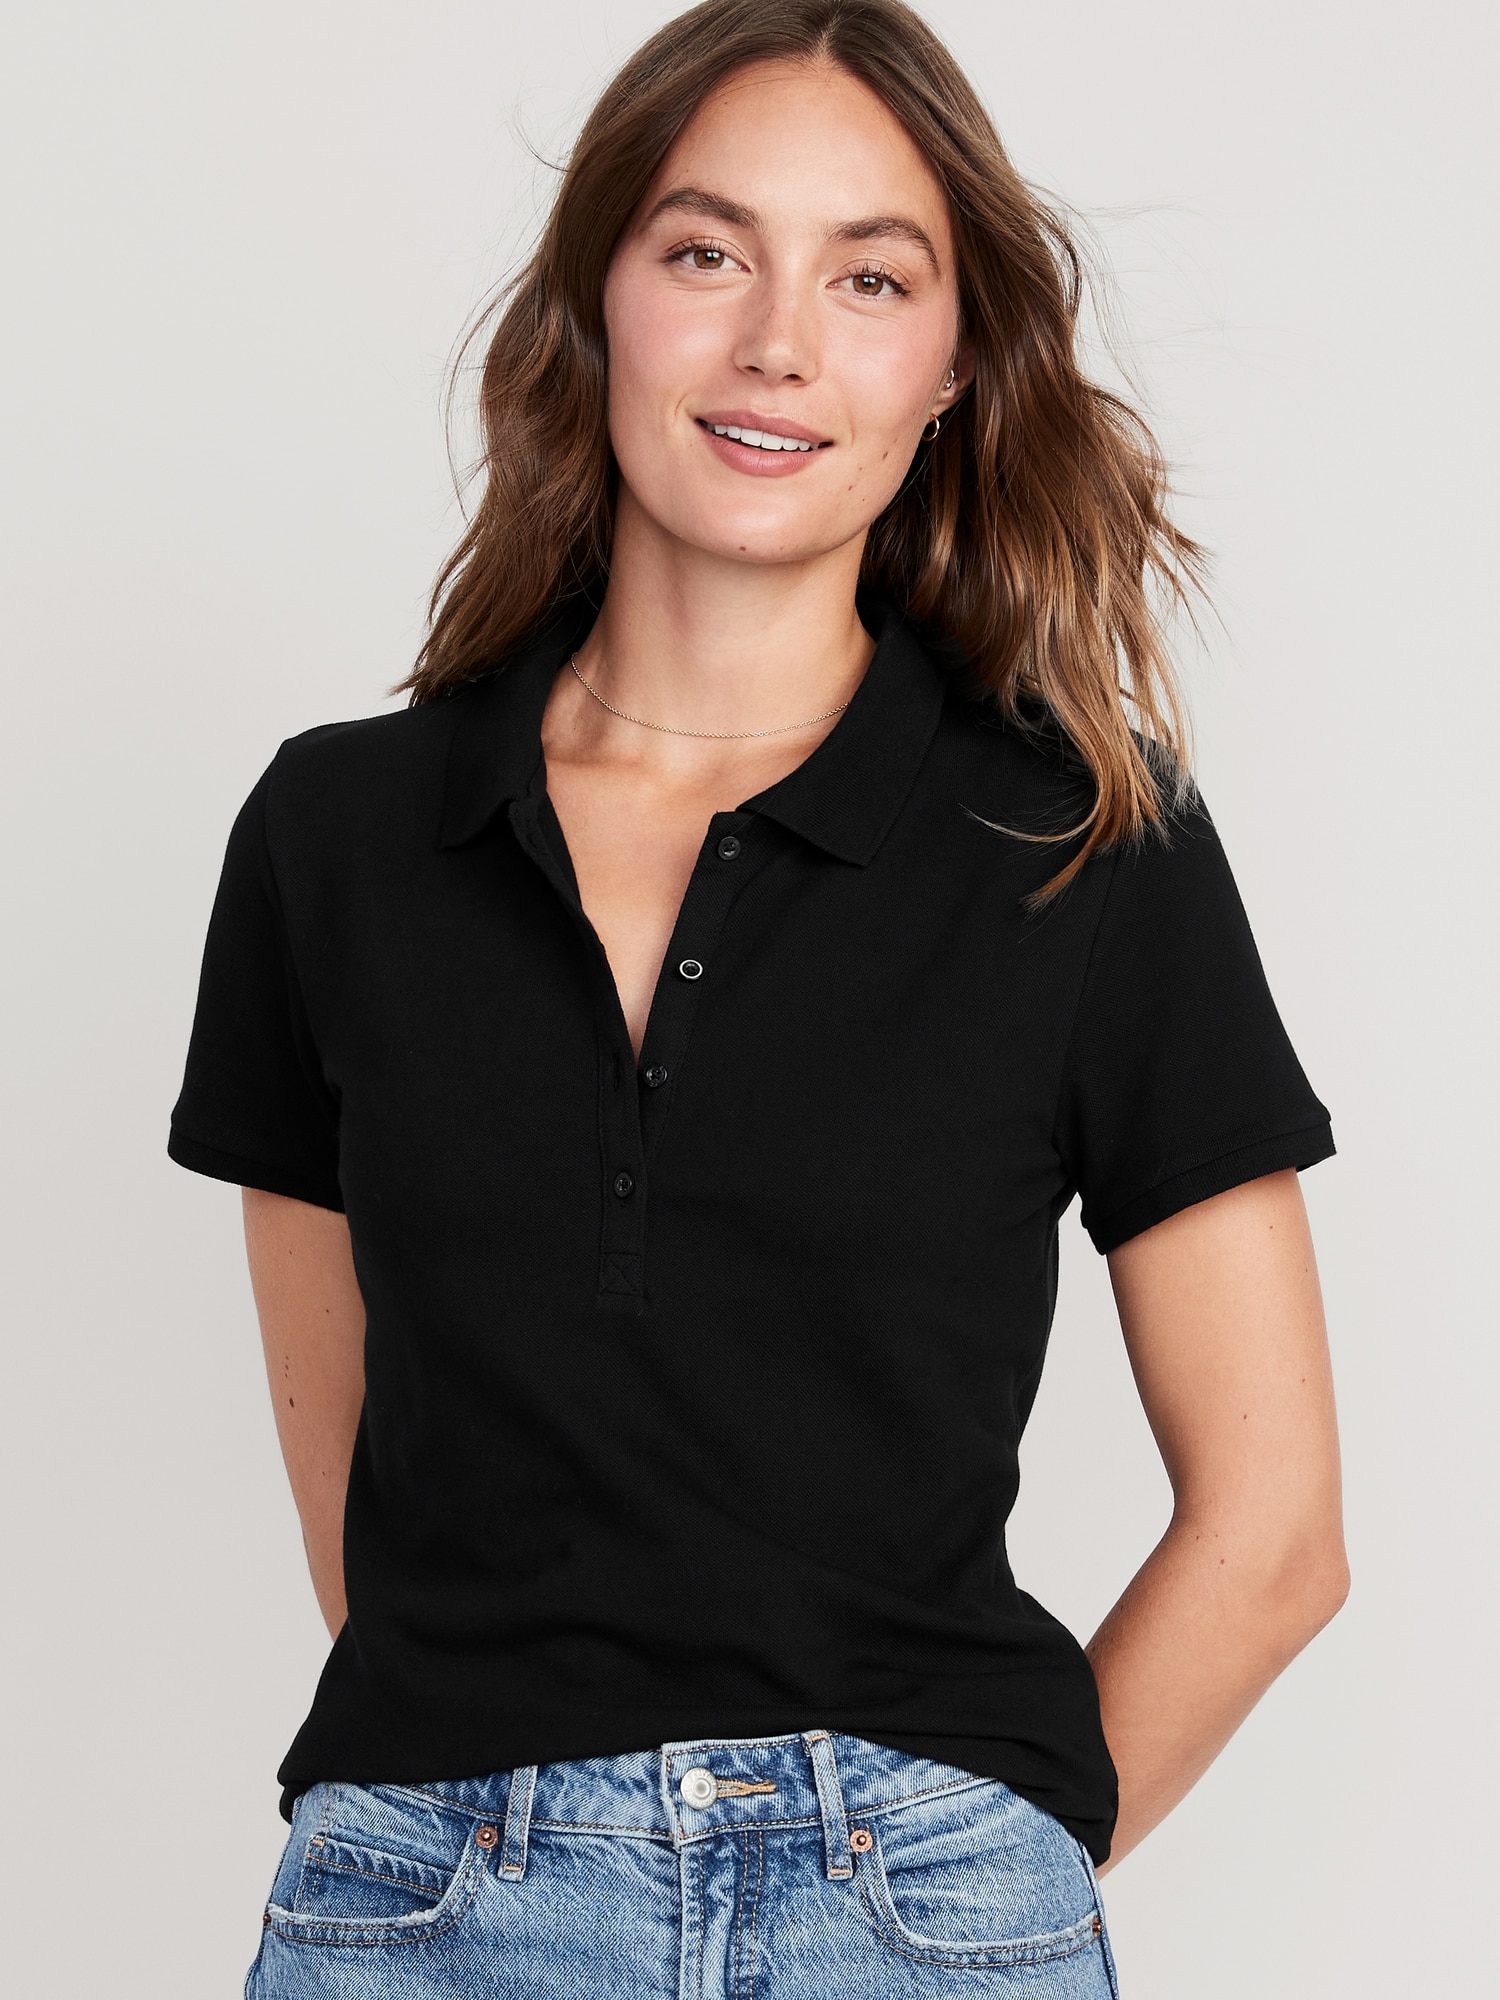 Women's Athletic Polo Shirts | Old Navy